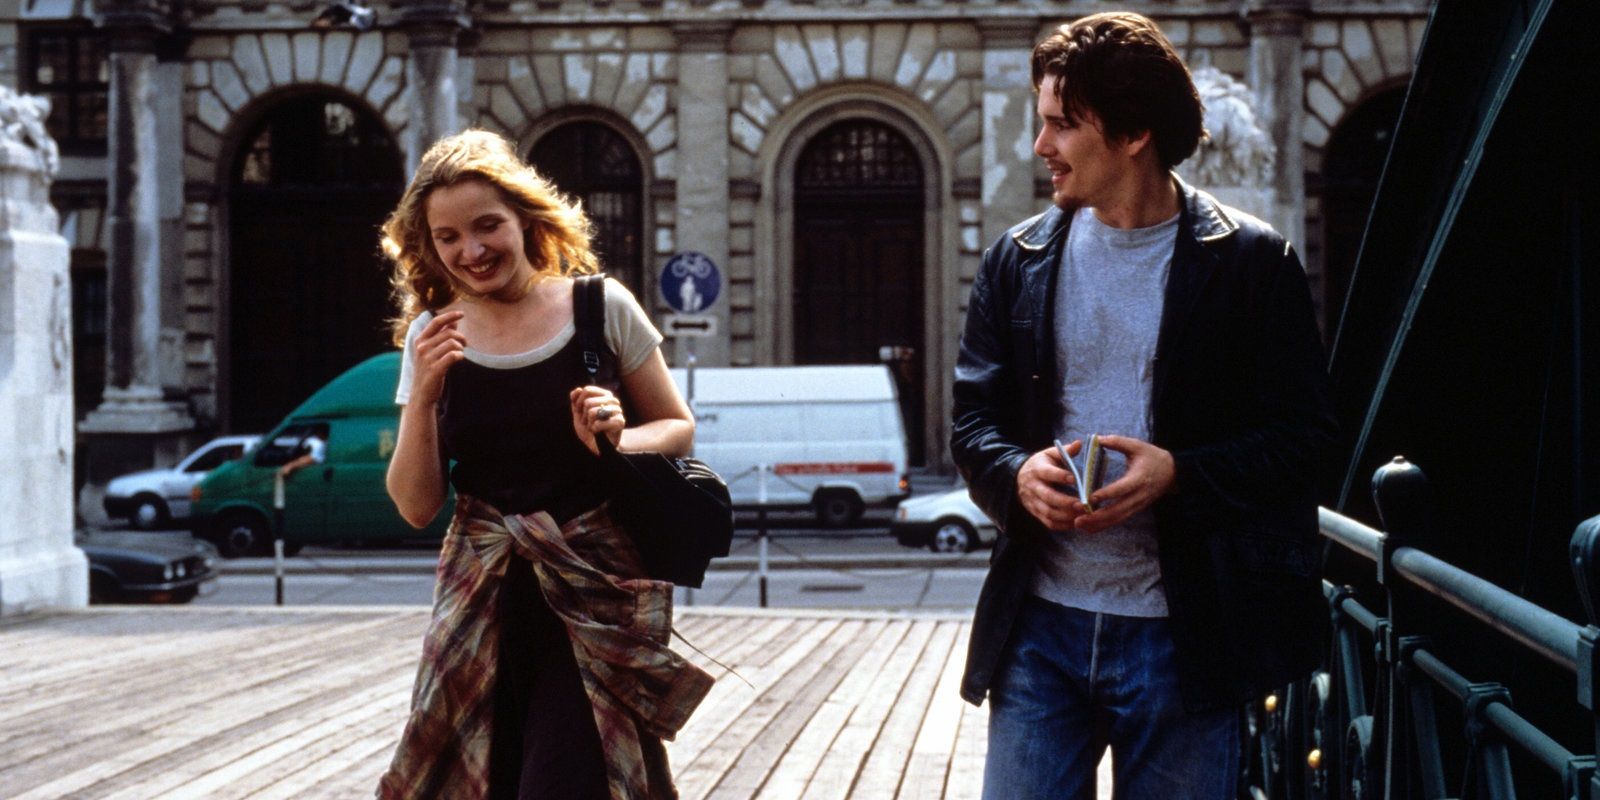 Jesse and Celine walking and laughing in Before Sunrise.